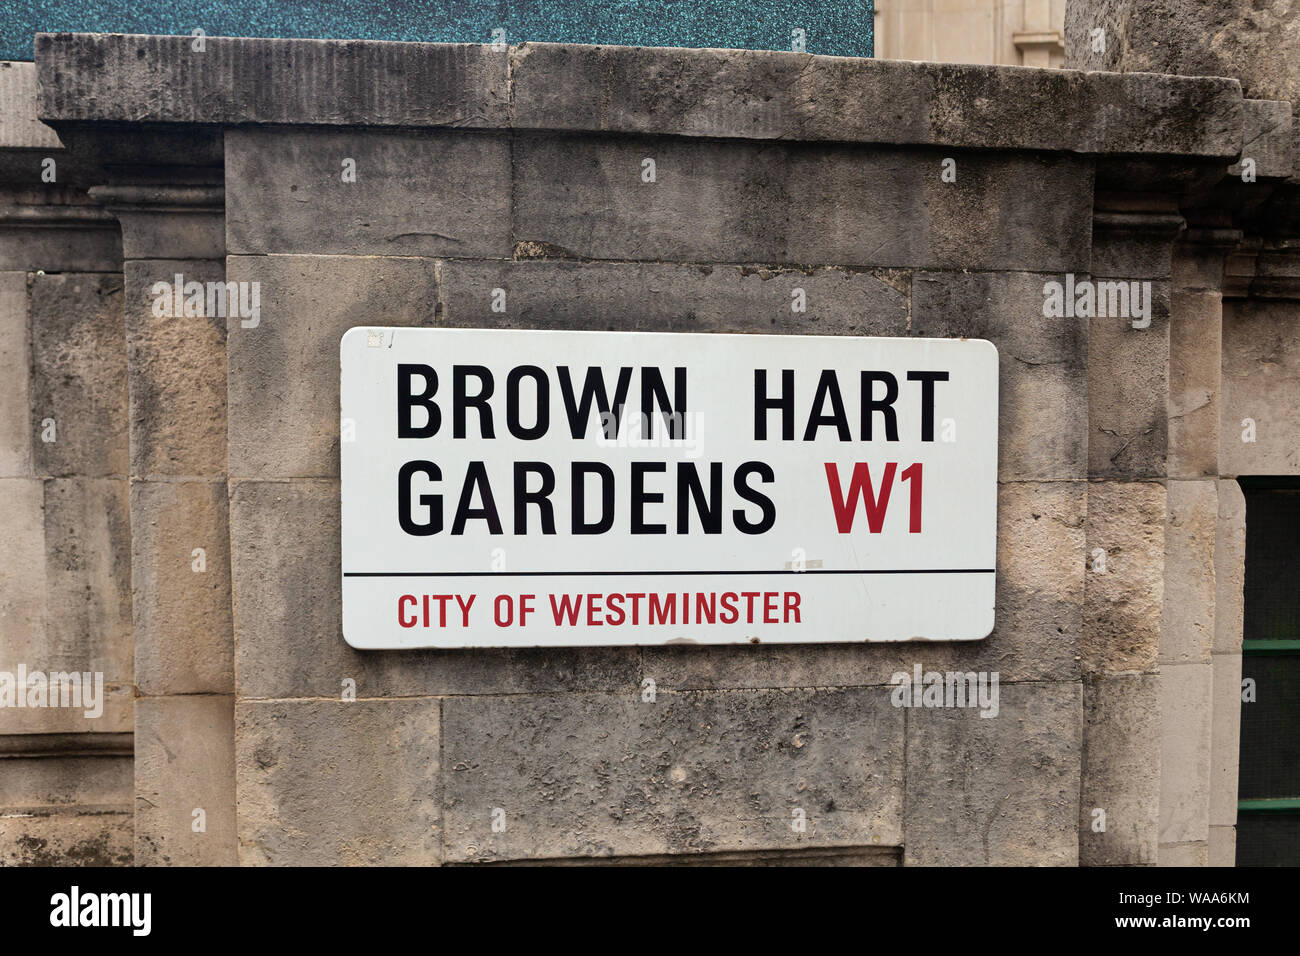 London / UK - July 18, 2019: Brown Hart Gardens name sign, City of Westminster. Located off Duke Street, Mayfair, it is a public garden on top of an e Stock Photo